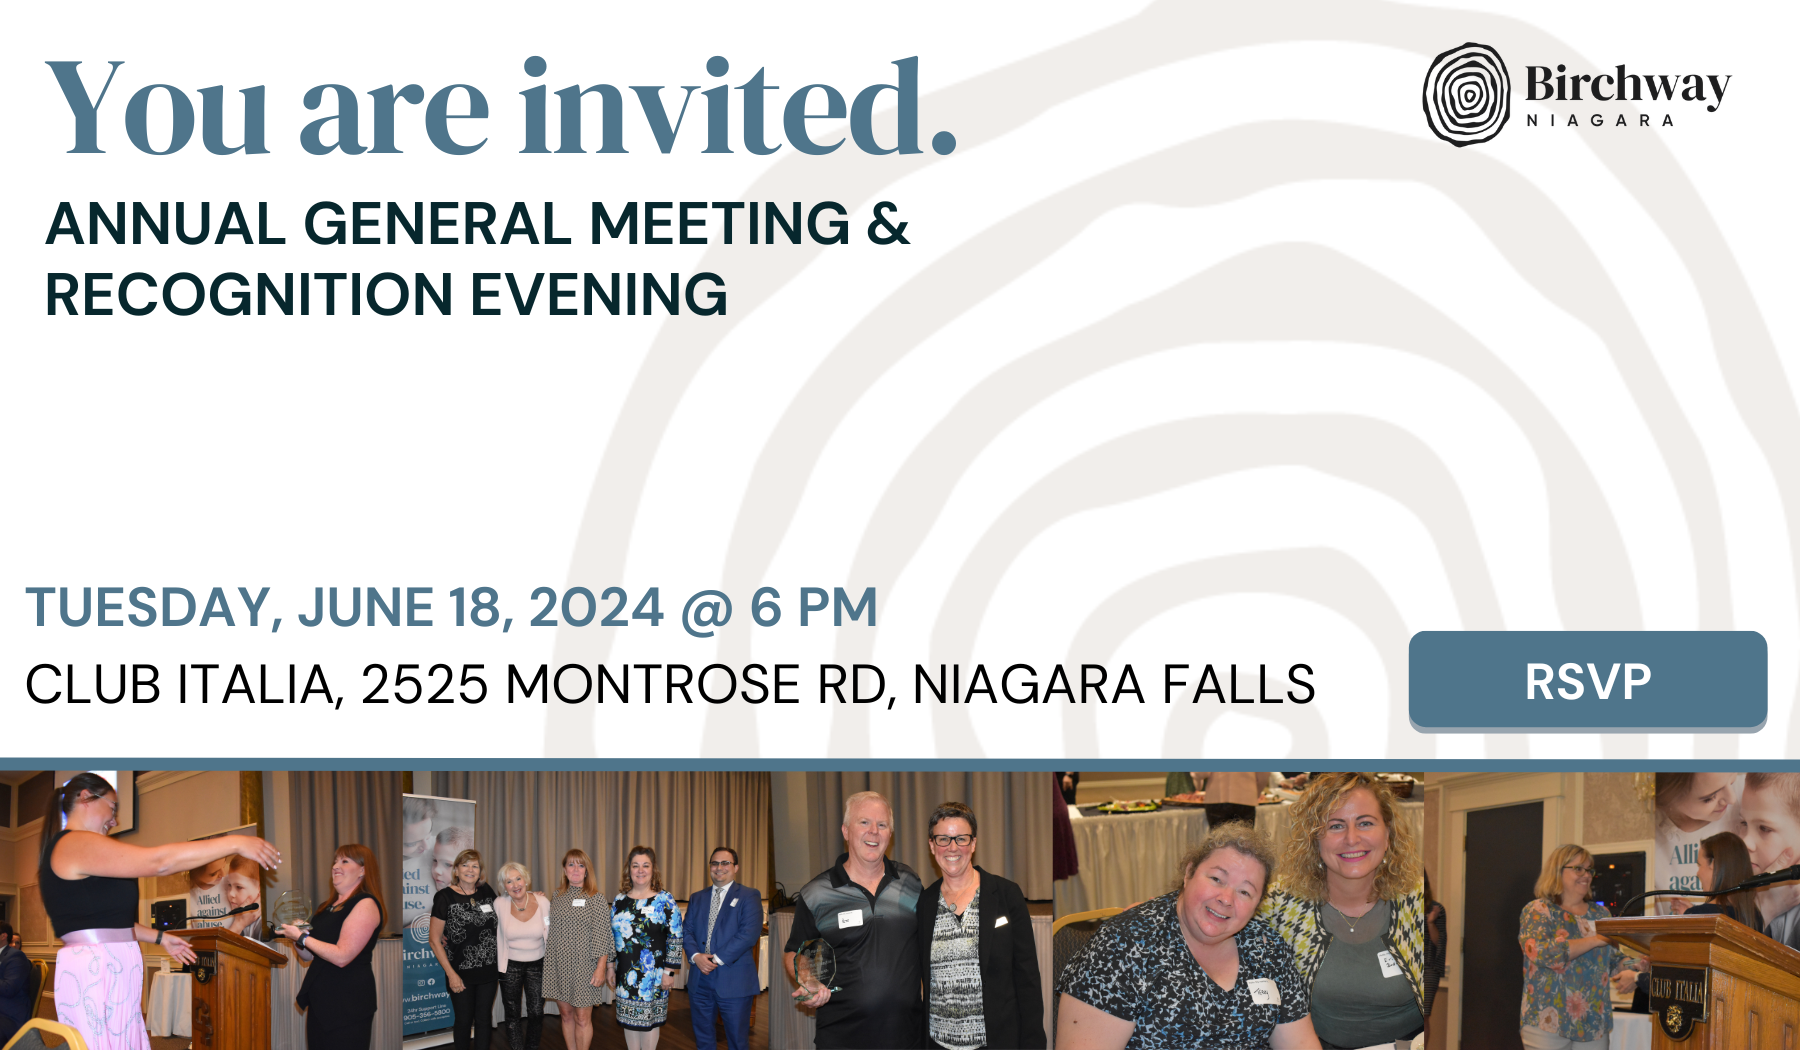 Text: You are invited. Annual General Meeting and Recognition Evening. June 18, 2024 at 6 p.m., Club Italia, 2525 Montrose Rd, Niagara Falls. Images: Images of people at last year's event run across bottom of page. You can click on this image to rsvp via email.